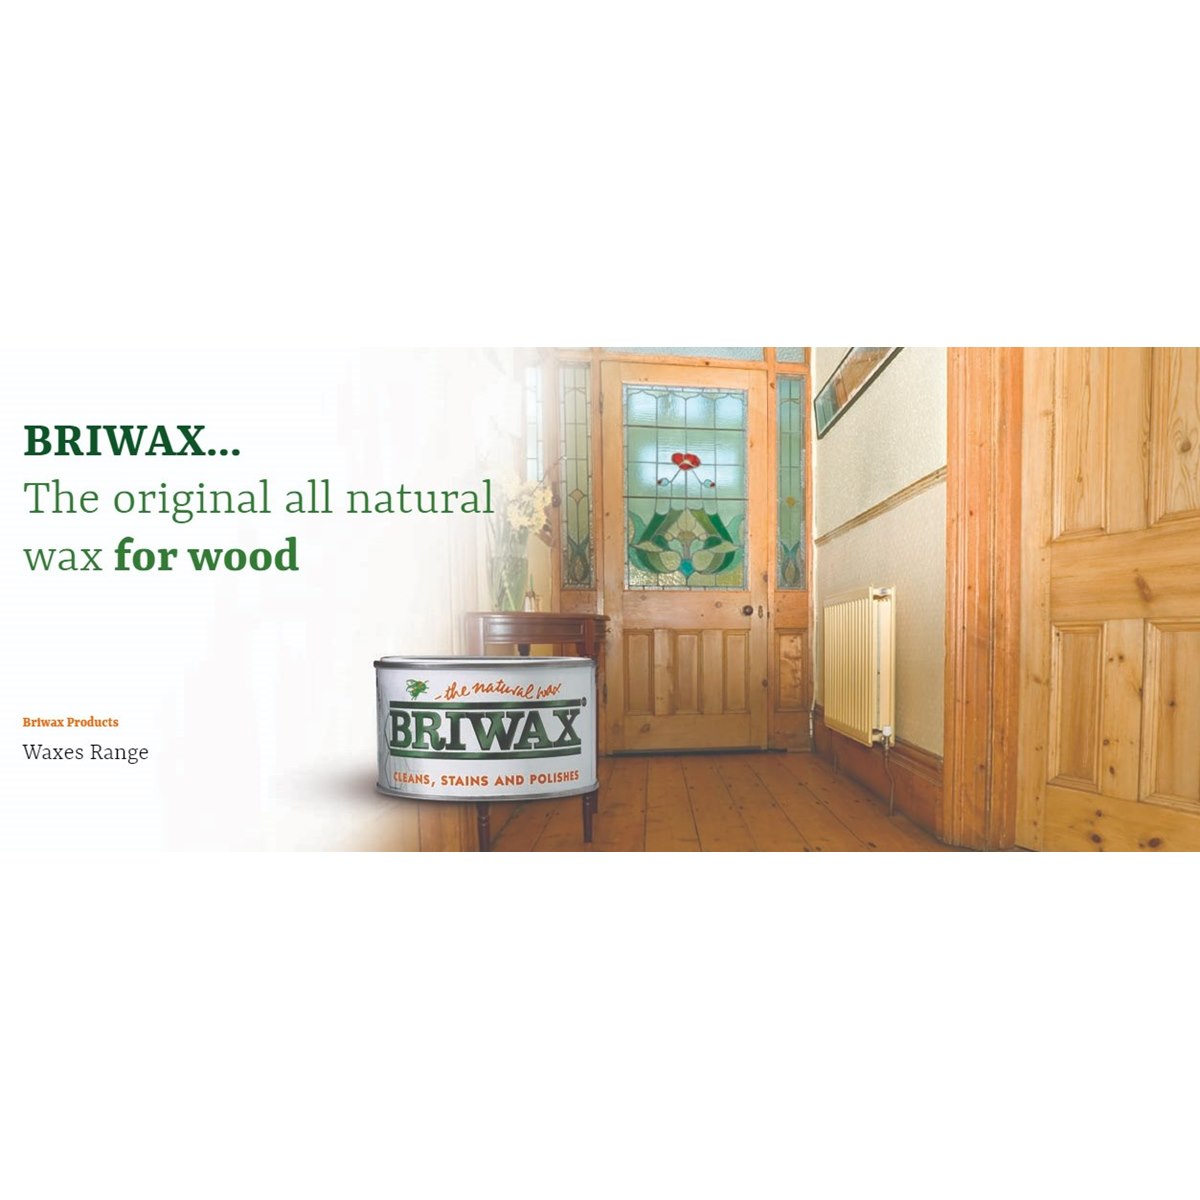 Where to buy Briwax Furniture Polish Online